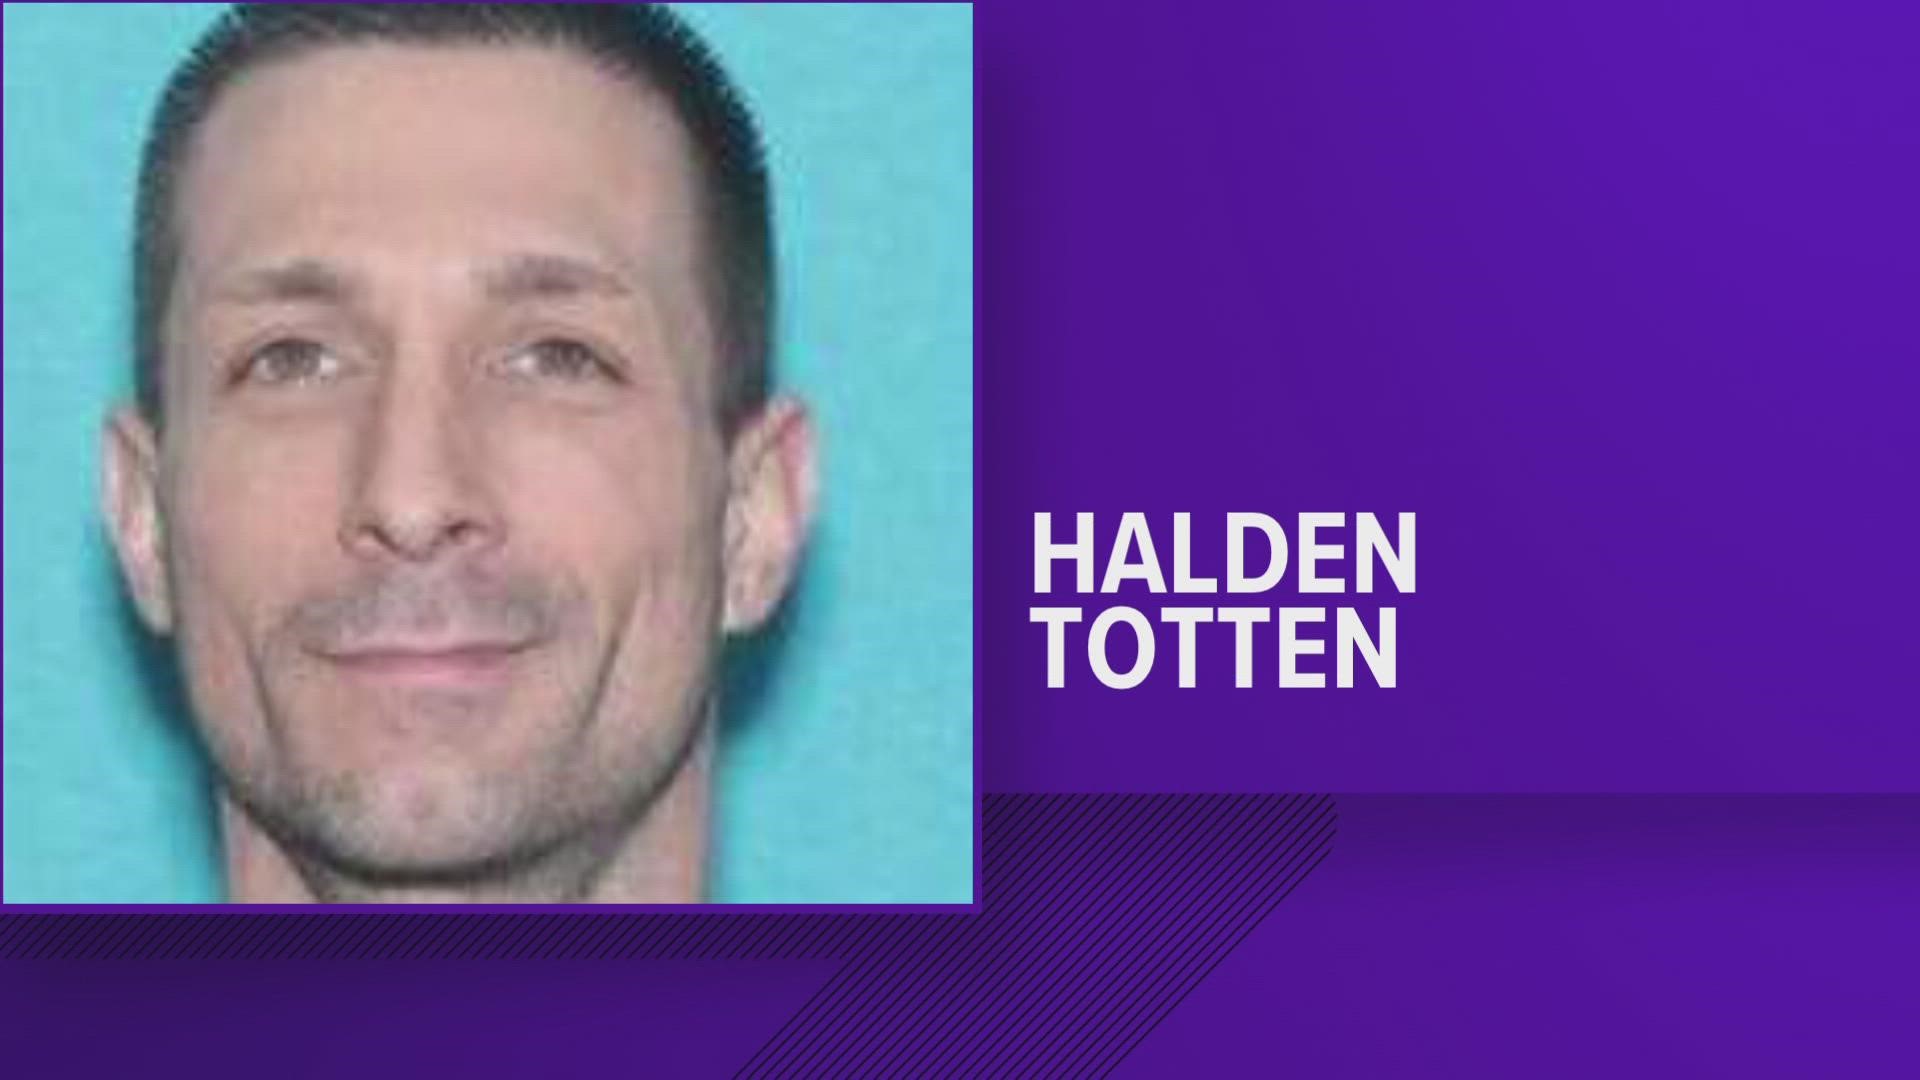 Kokomo police are looking for 36-year-old Halden Totten wanted for attempted murder of a 55-year-old man.